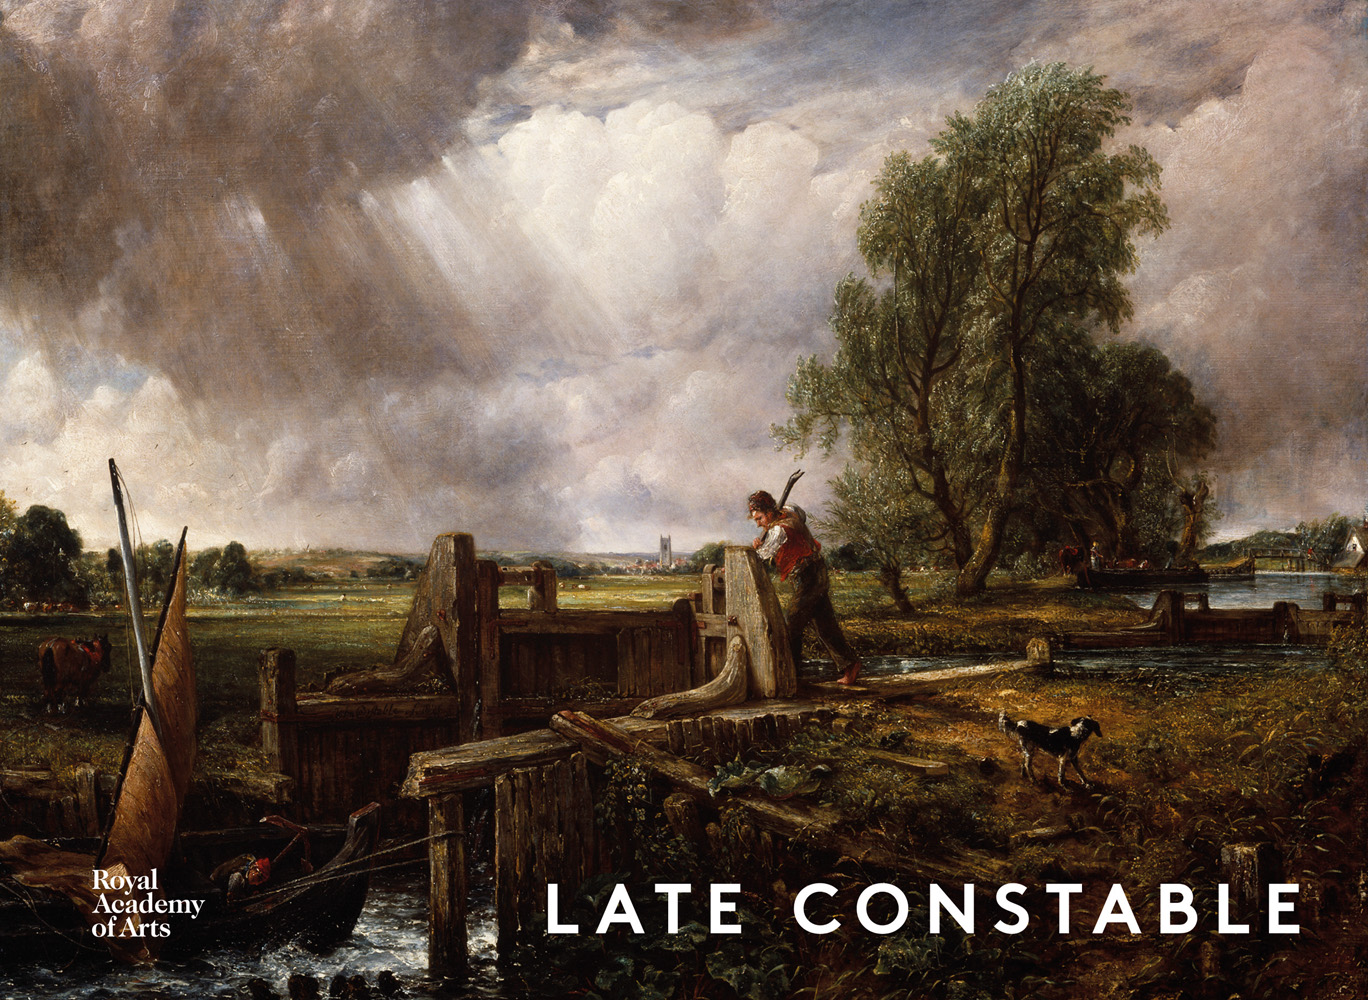 Landscape painting of The Lock by John Constable with Late Constable in white font in lower right corner